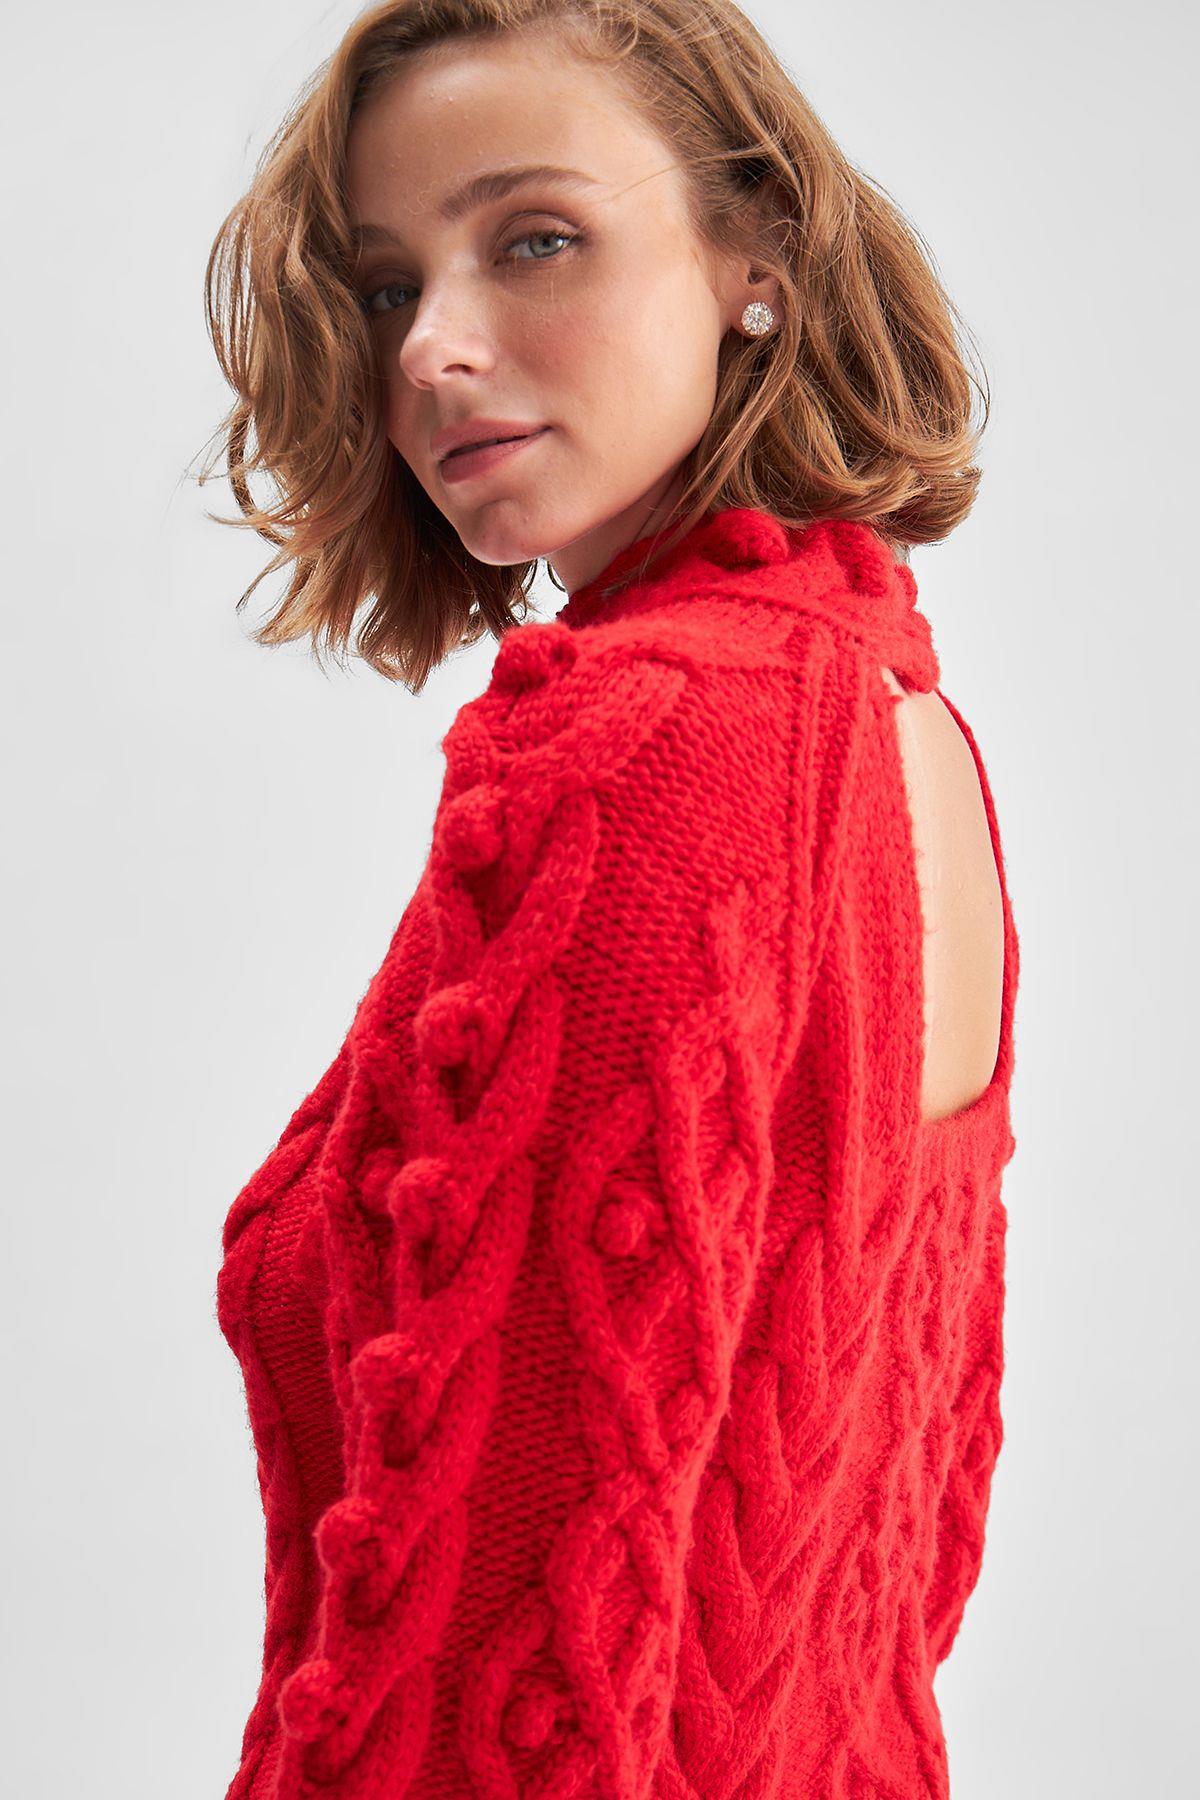 Back Detailed Cable Knit Pompom Red Knitwear Sweater